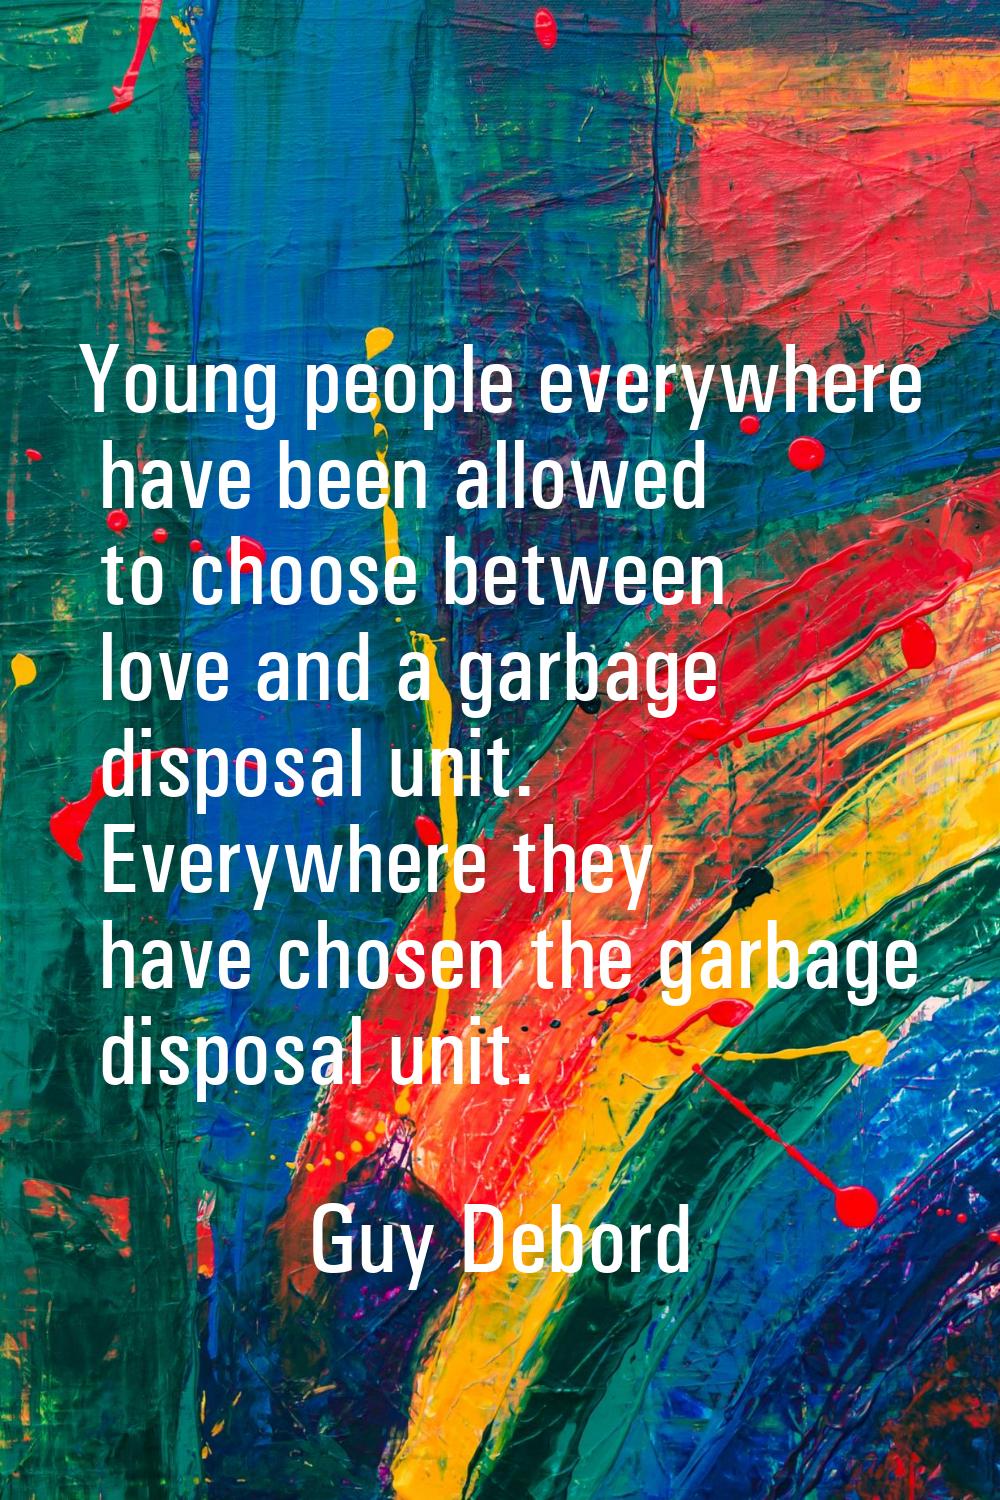 Young people everywhere have been allowed to choose between love and a garbage disposal unit. Every